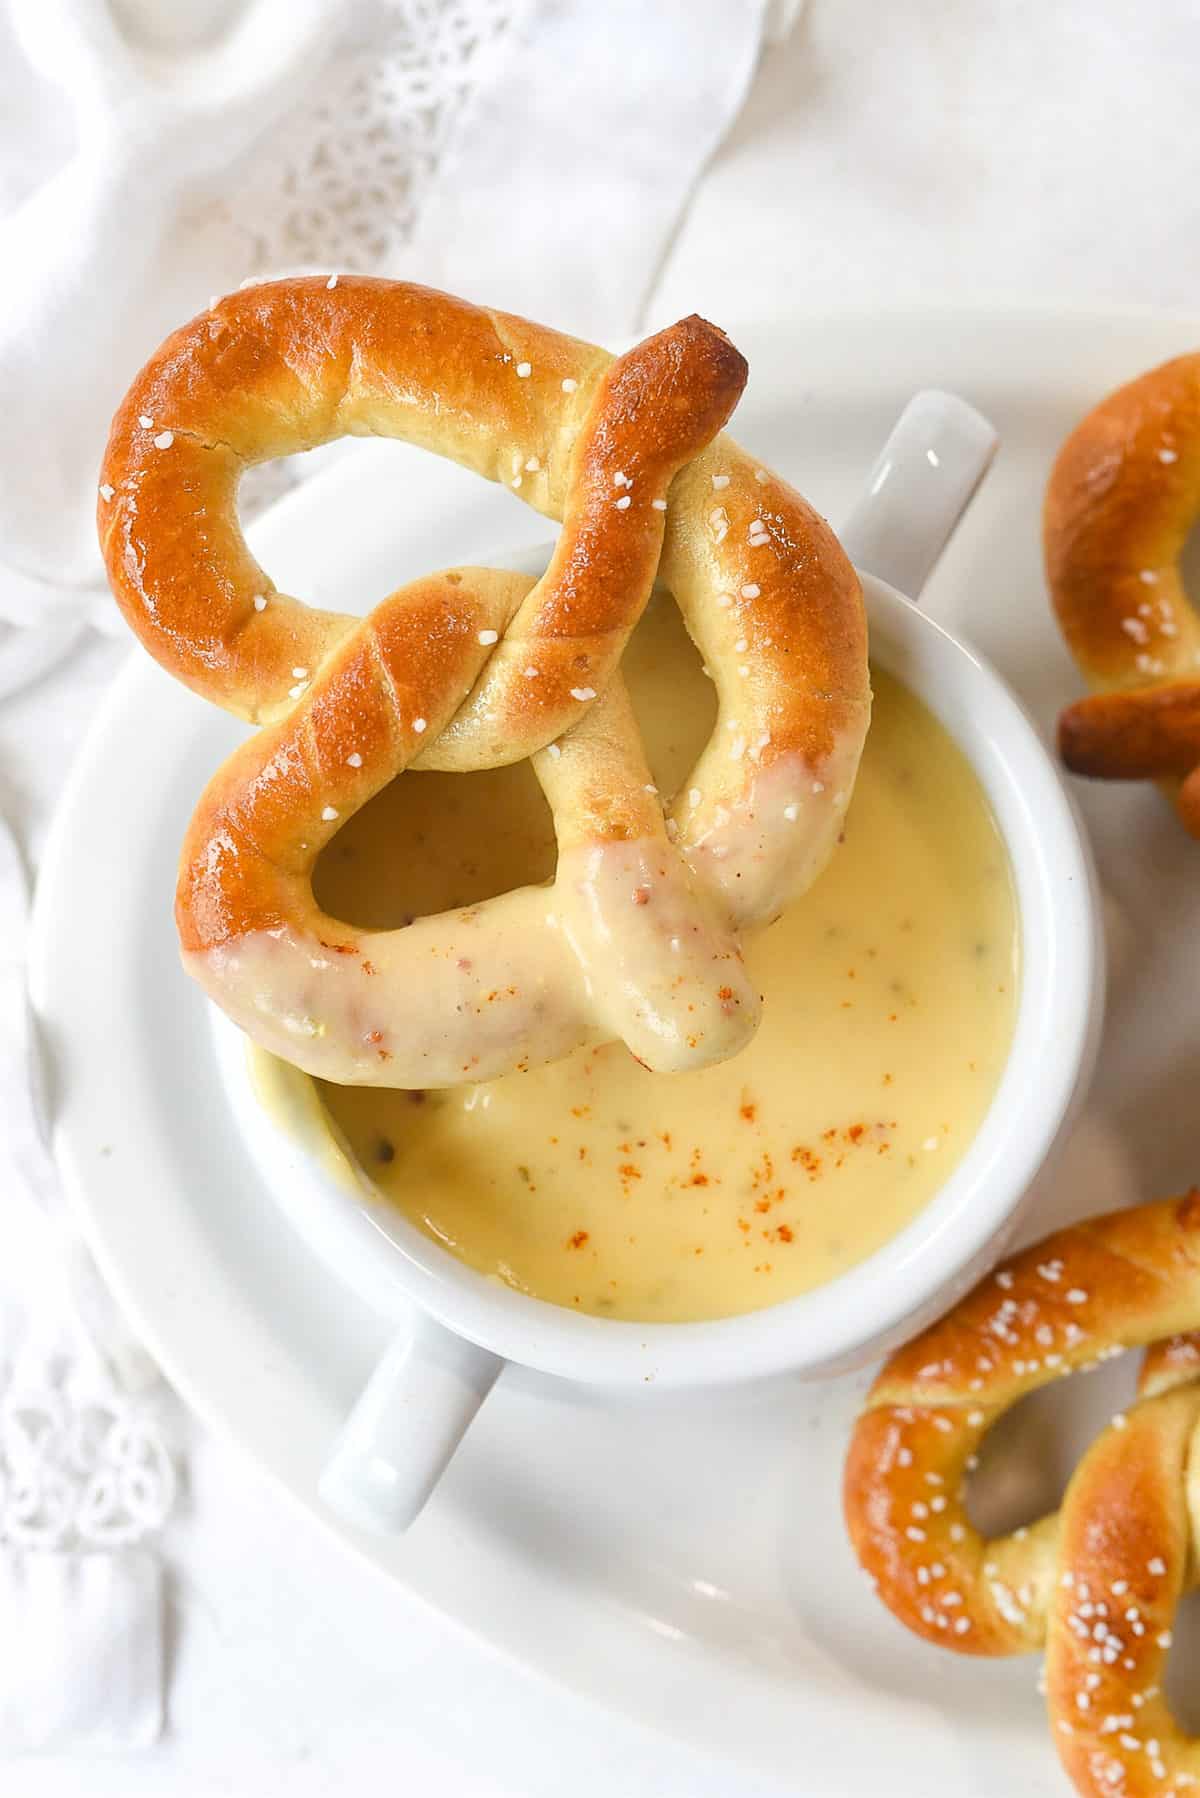 pretzel dipped in cheese sauce on a bowl